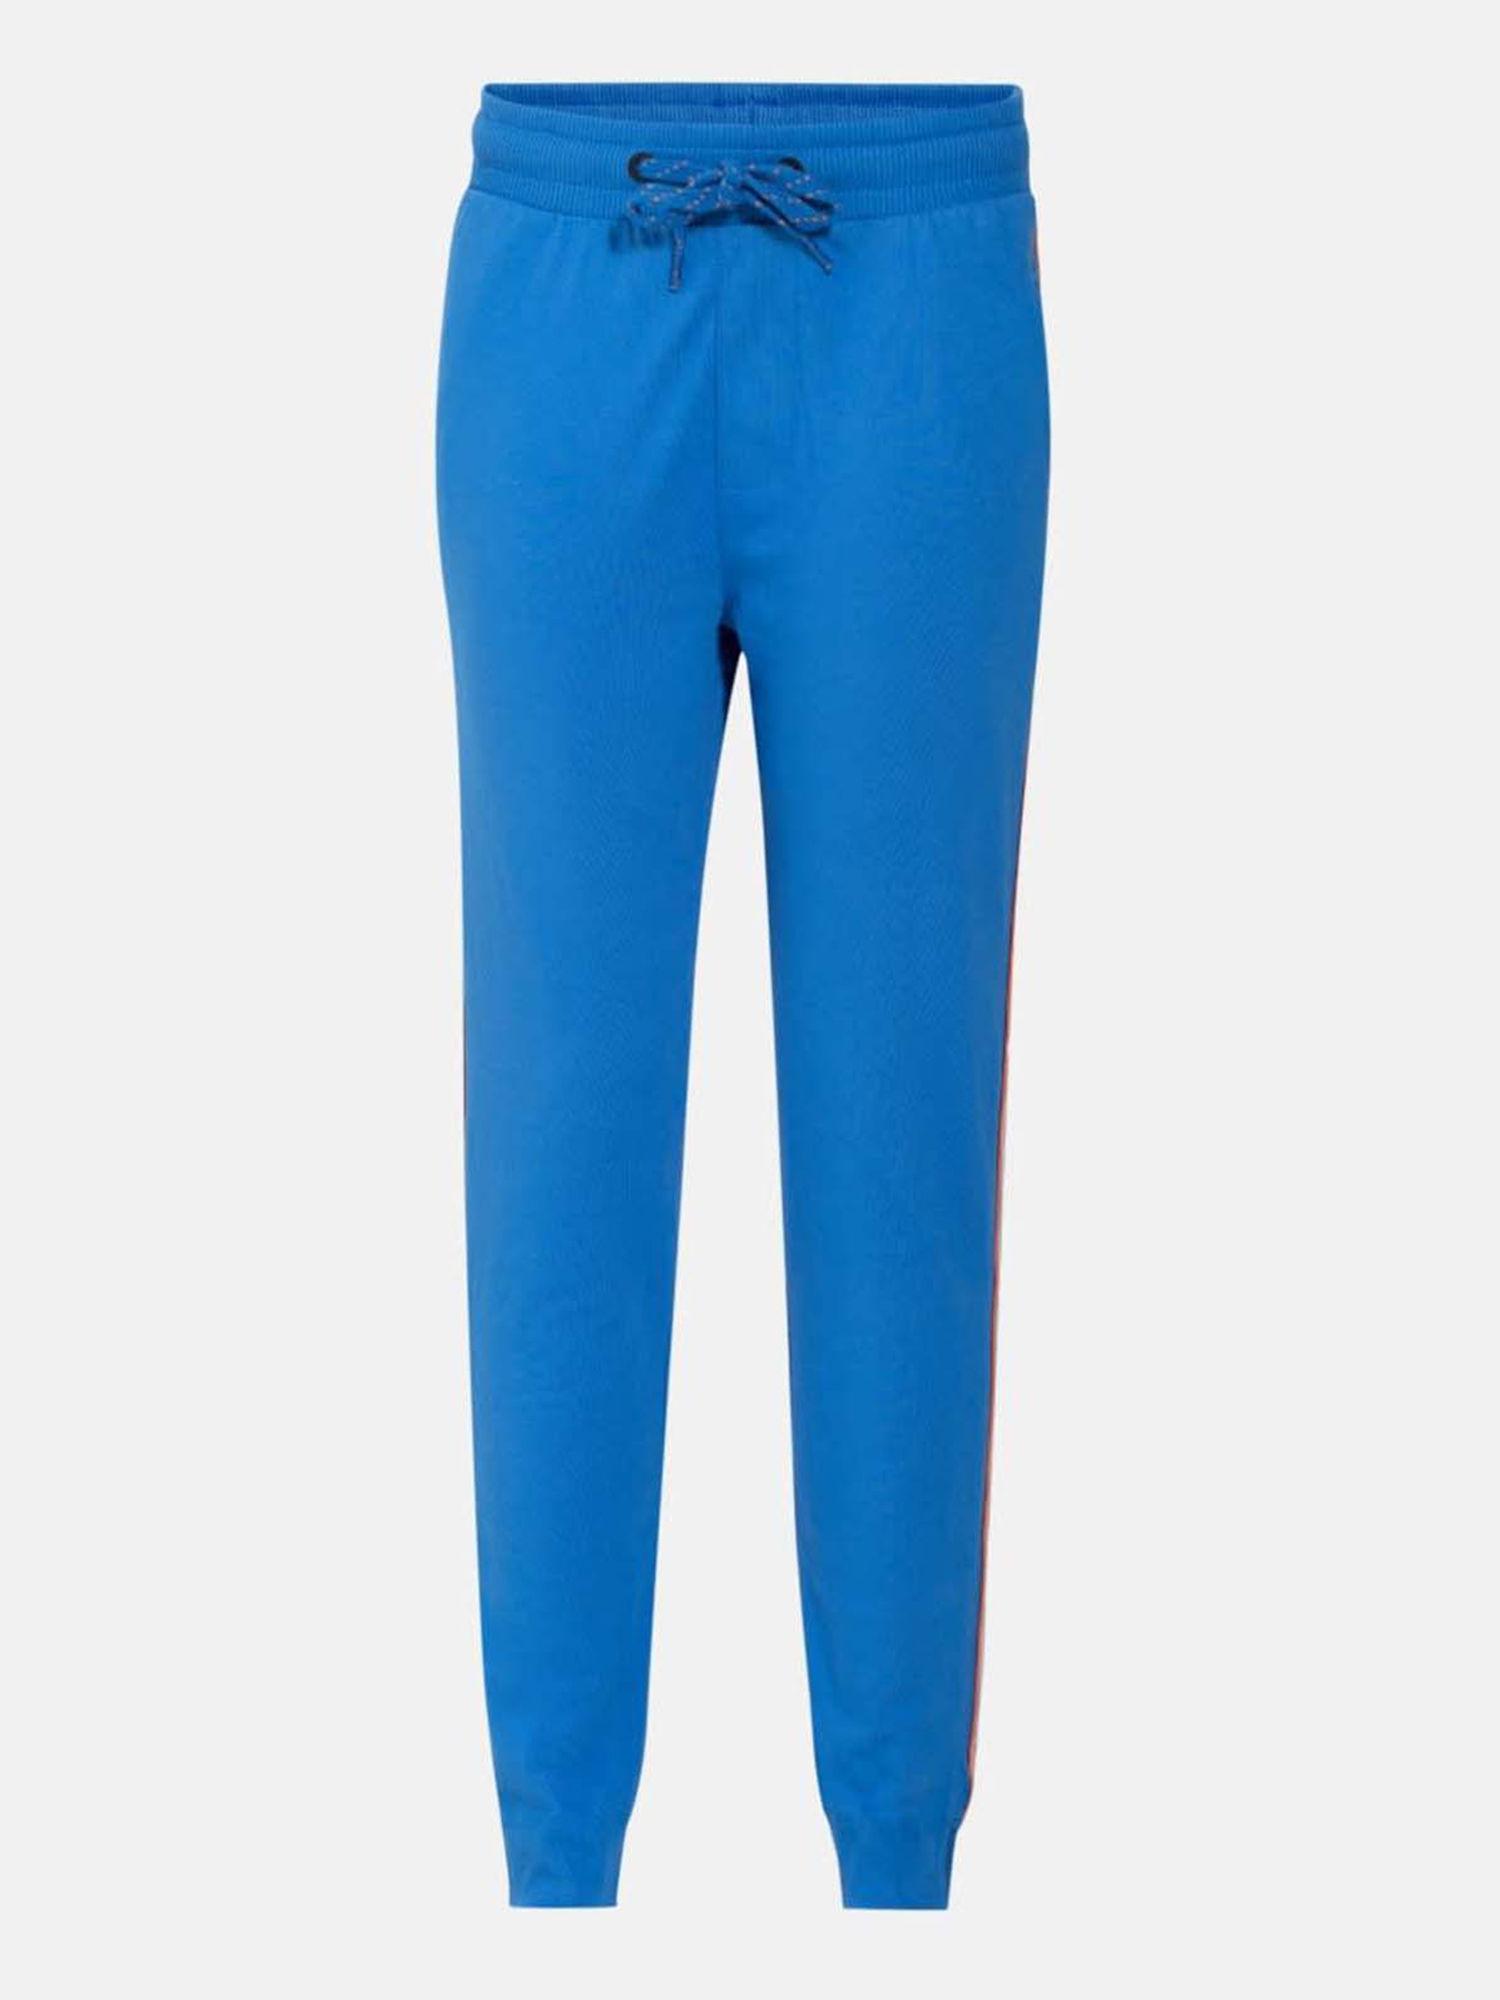 palace blue track pant - style number - (ab31)